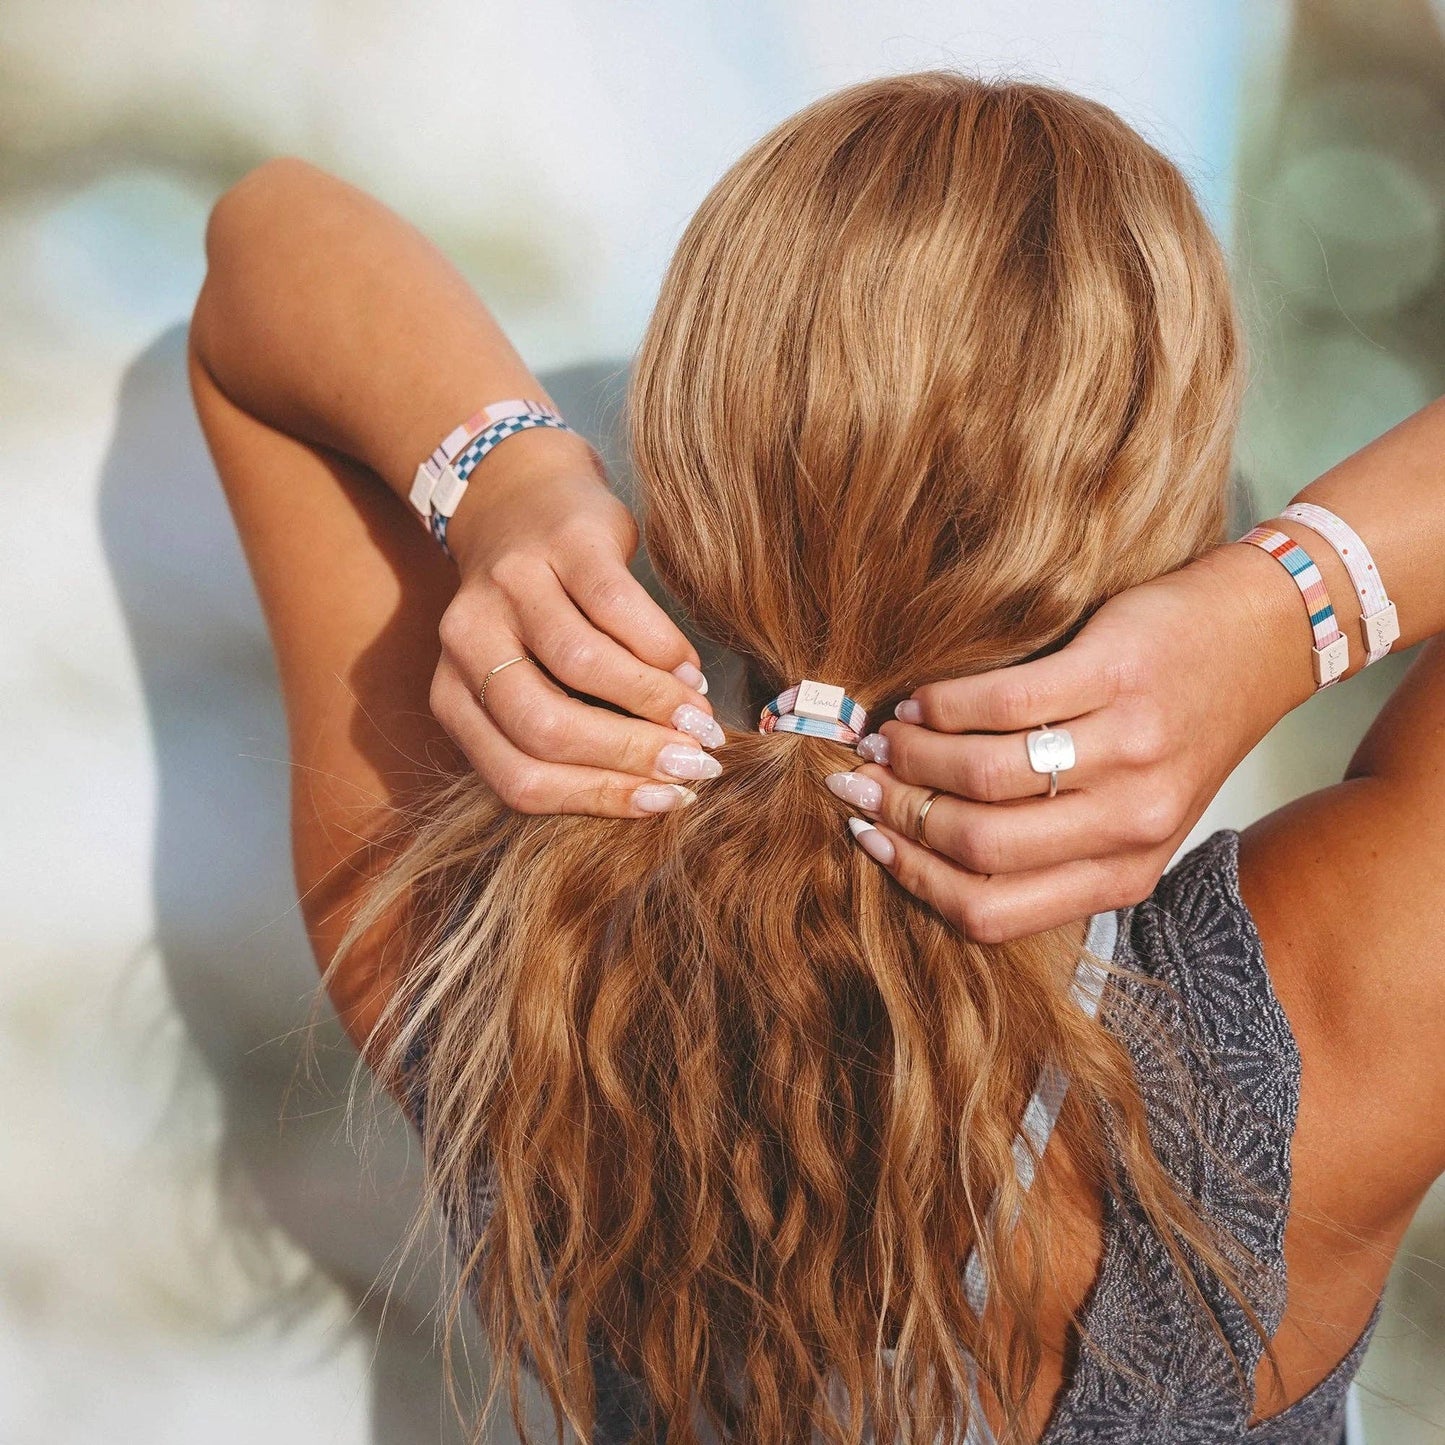 Passion - Hair + Wrist Band: Large